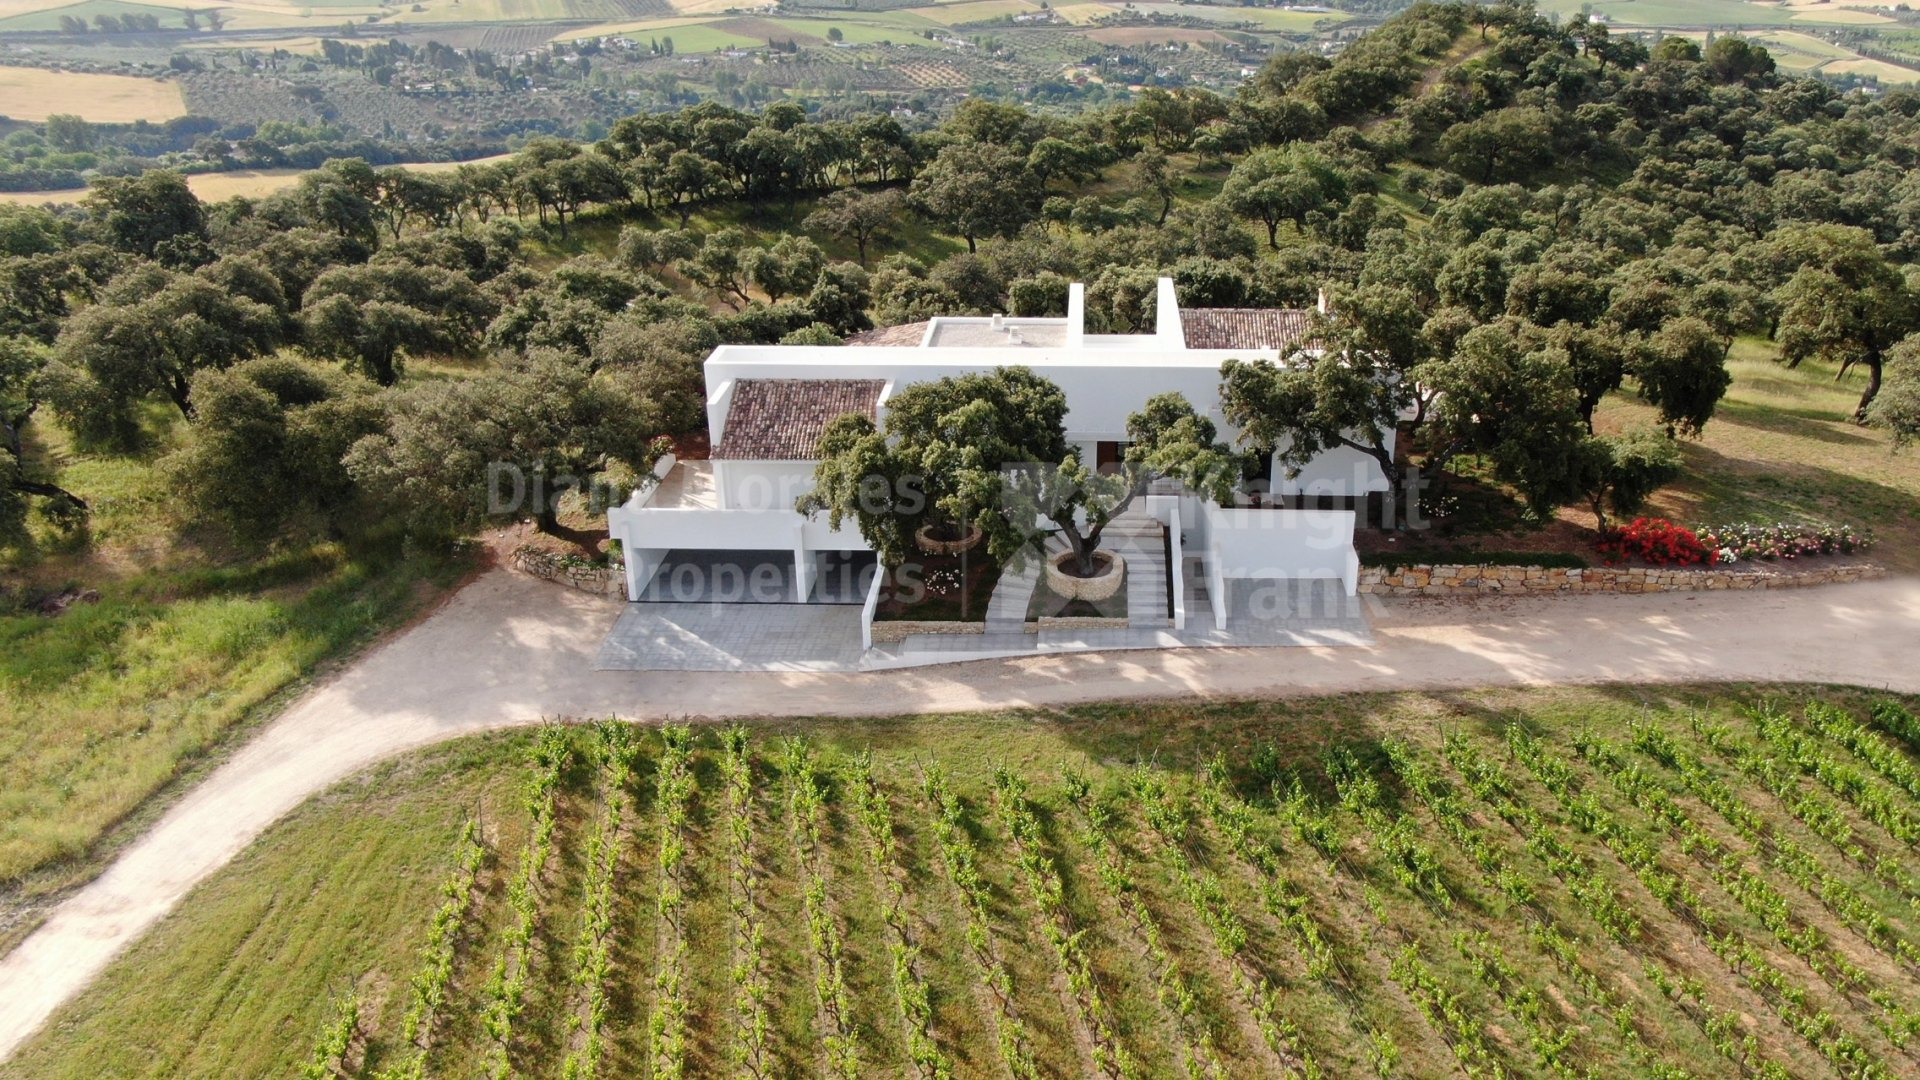 Ronda, Four bedroom villa for sale within The Wine and Country Club